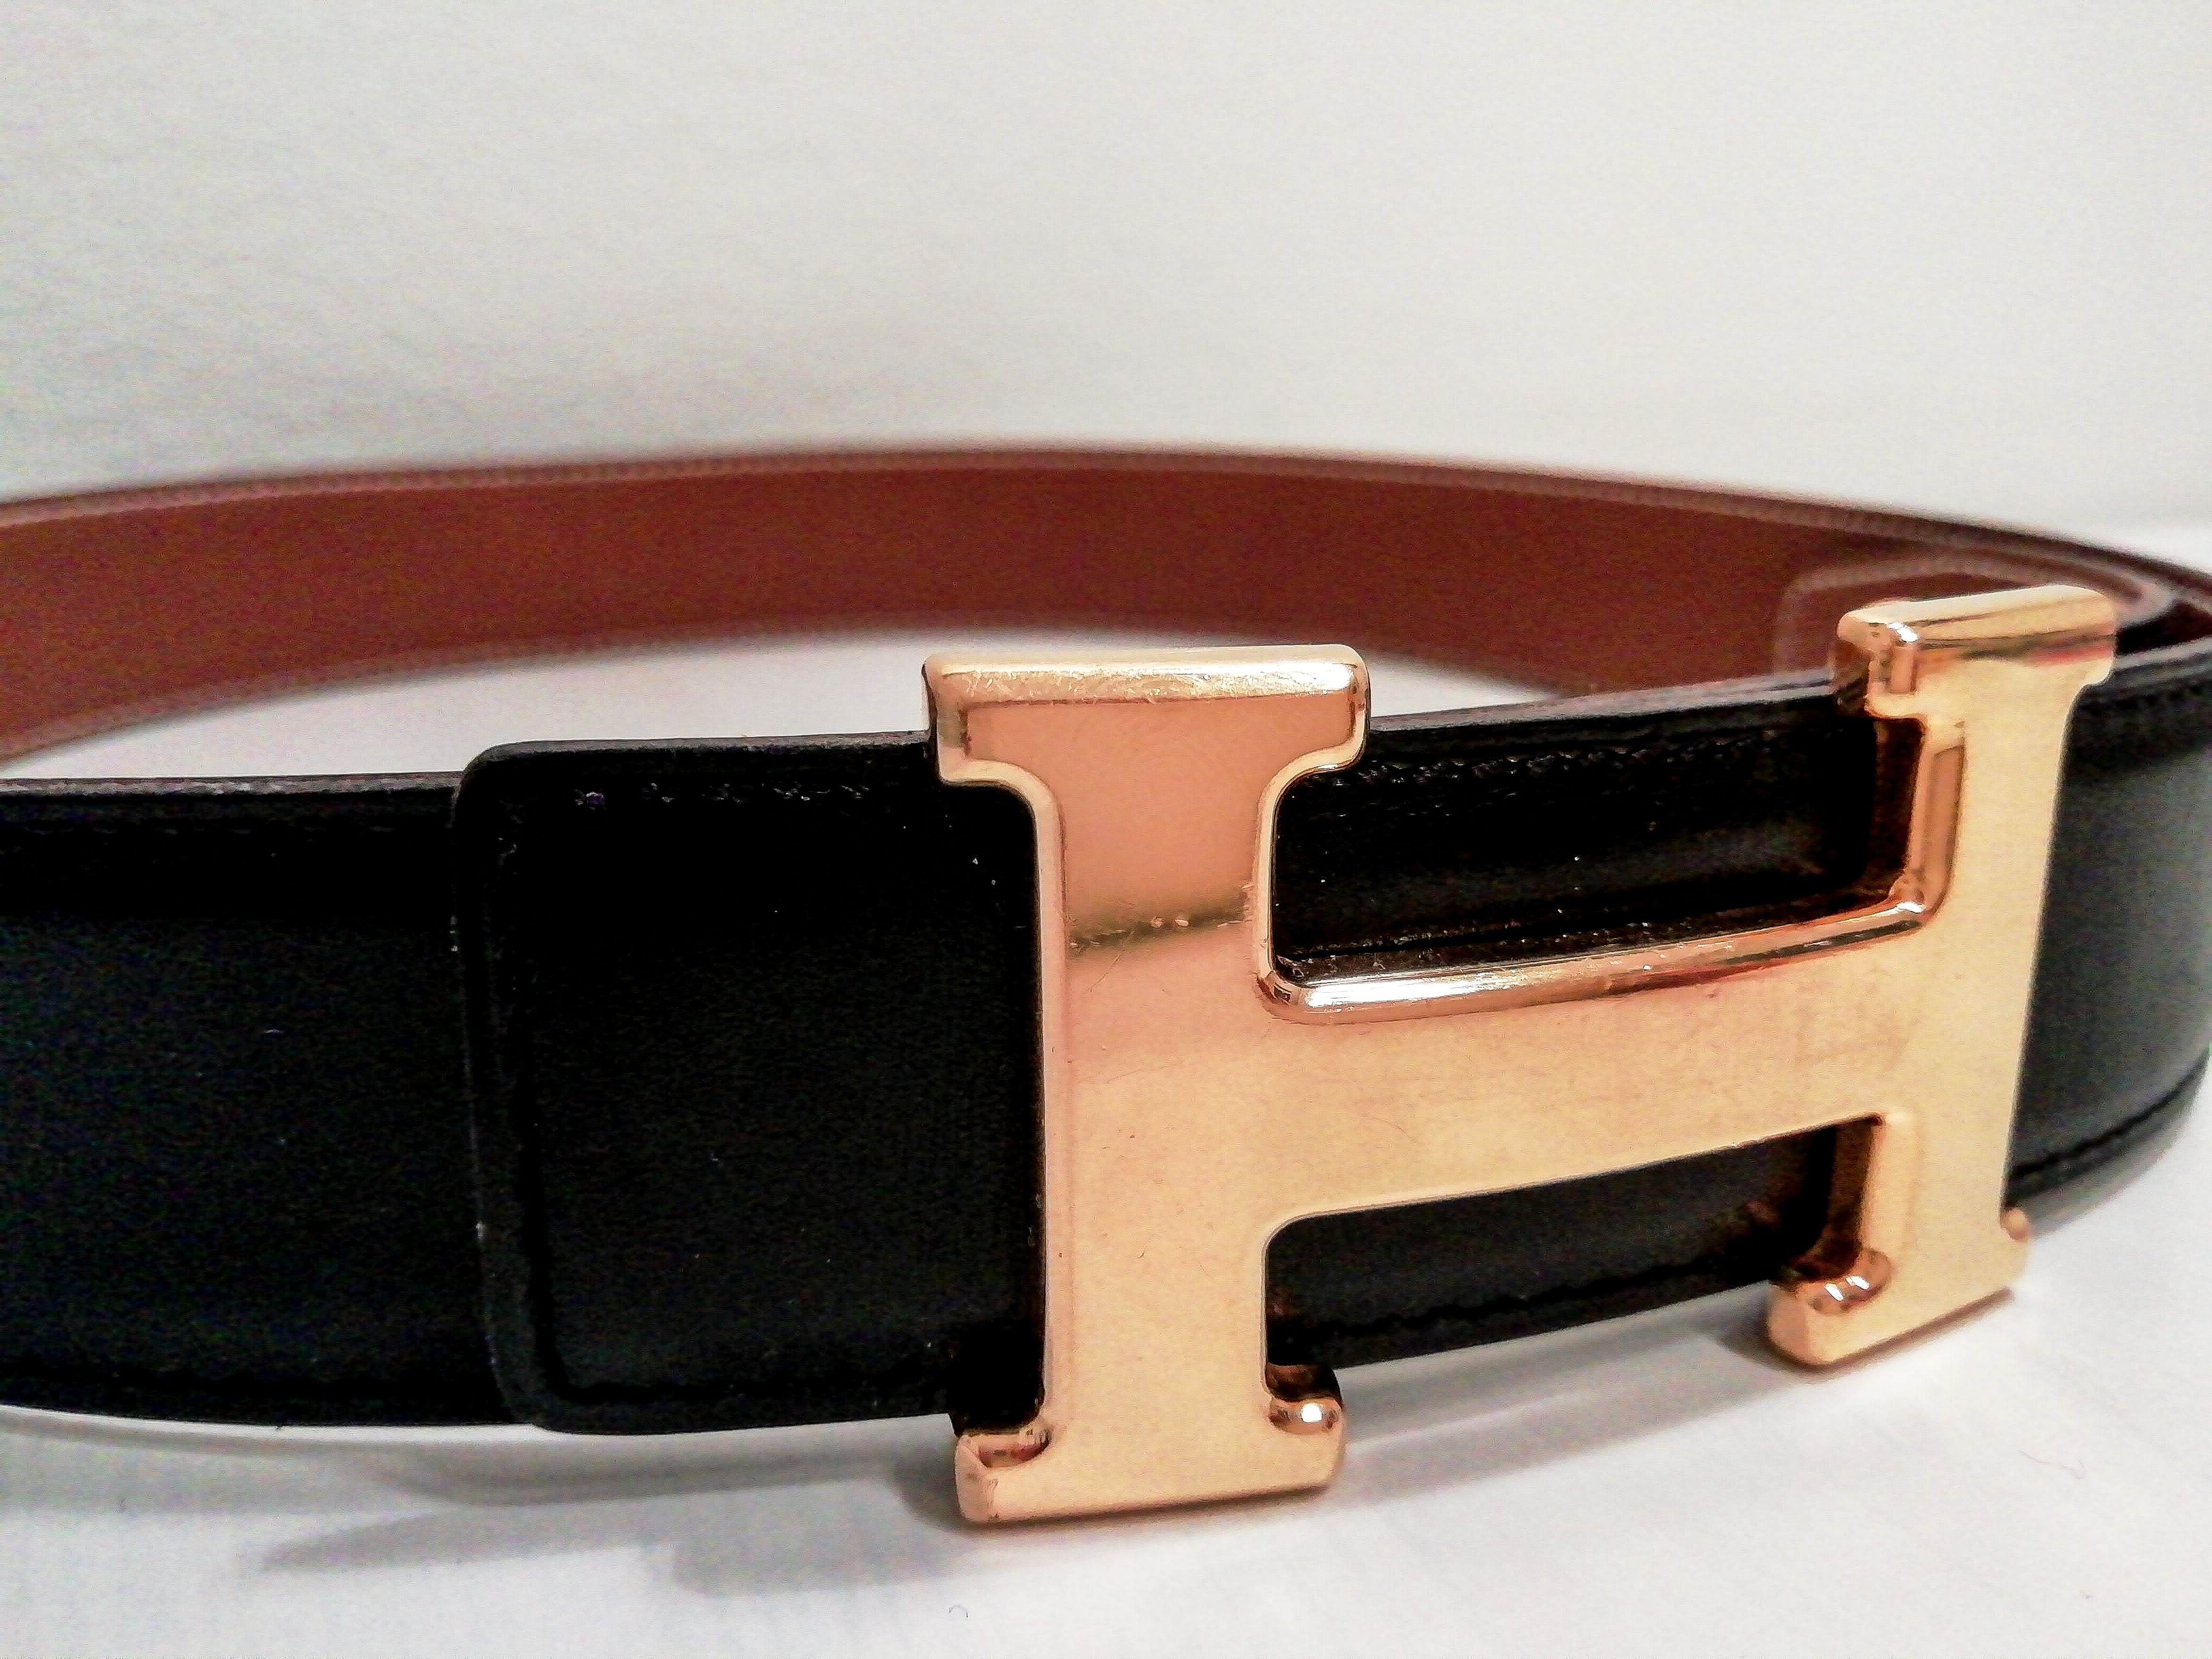 h on my belt stand for hermes